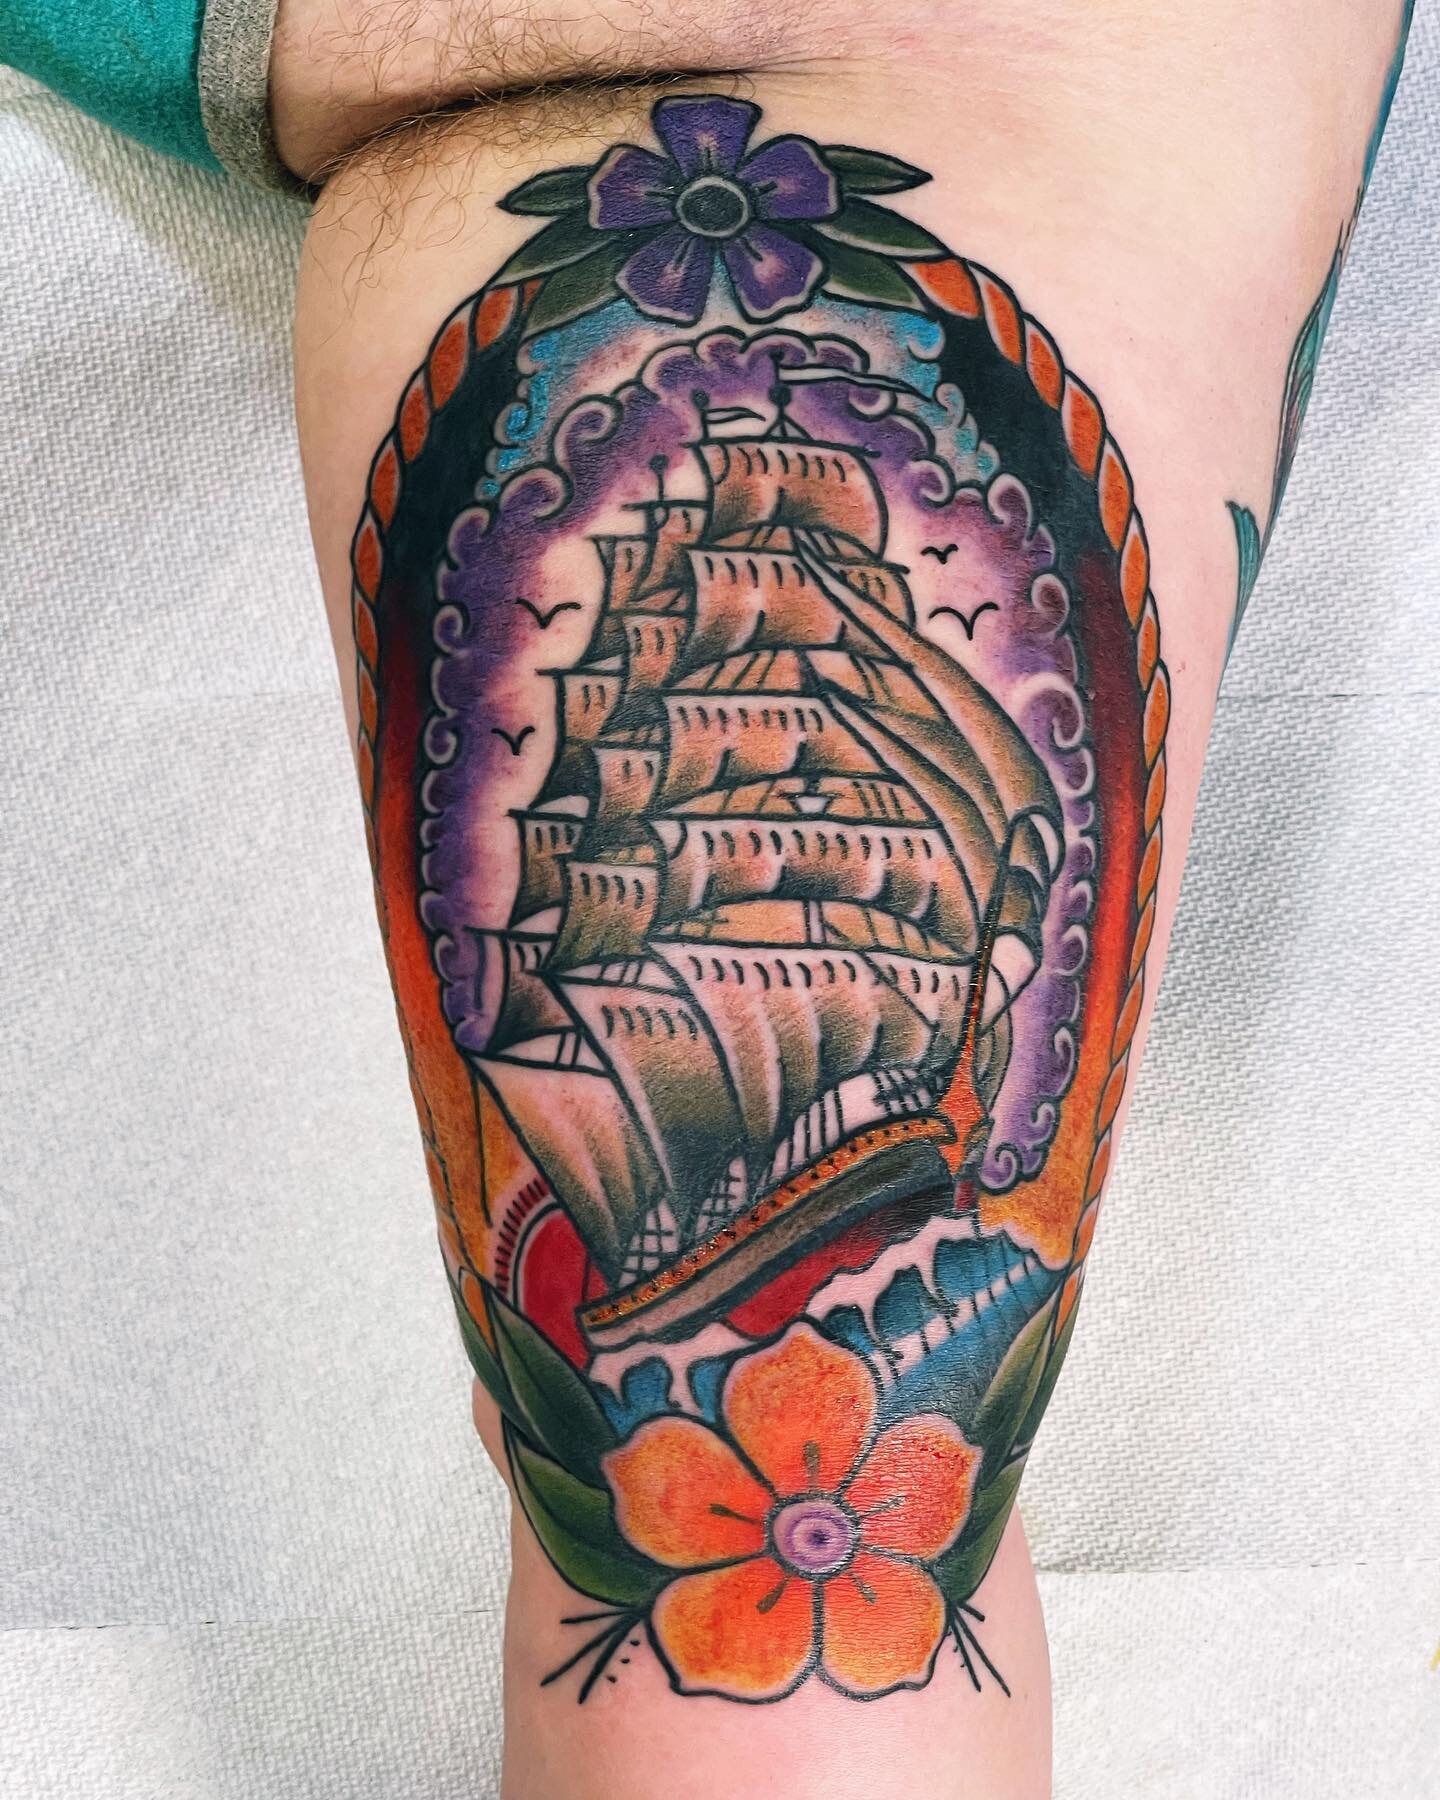 &ldquo;Sailing is, like, so not the fastest way to get anywhere.&rdquo;
Done with
@crybabytattooproducts @nedzrotary @poisoned_machines @industryinks @electrumsupply @tattcom 
.

.
.
.
.
.
#traditionaltattoo #tattoo #tattooart #tattooideas #tattoos #